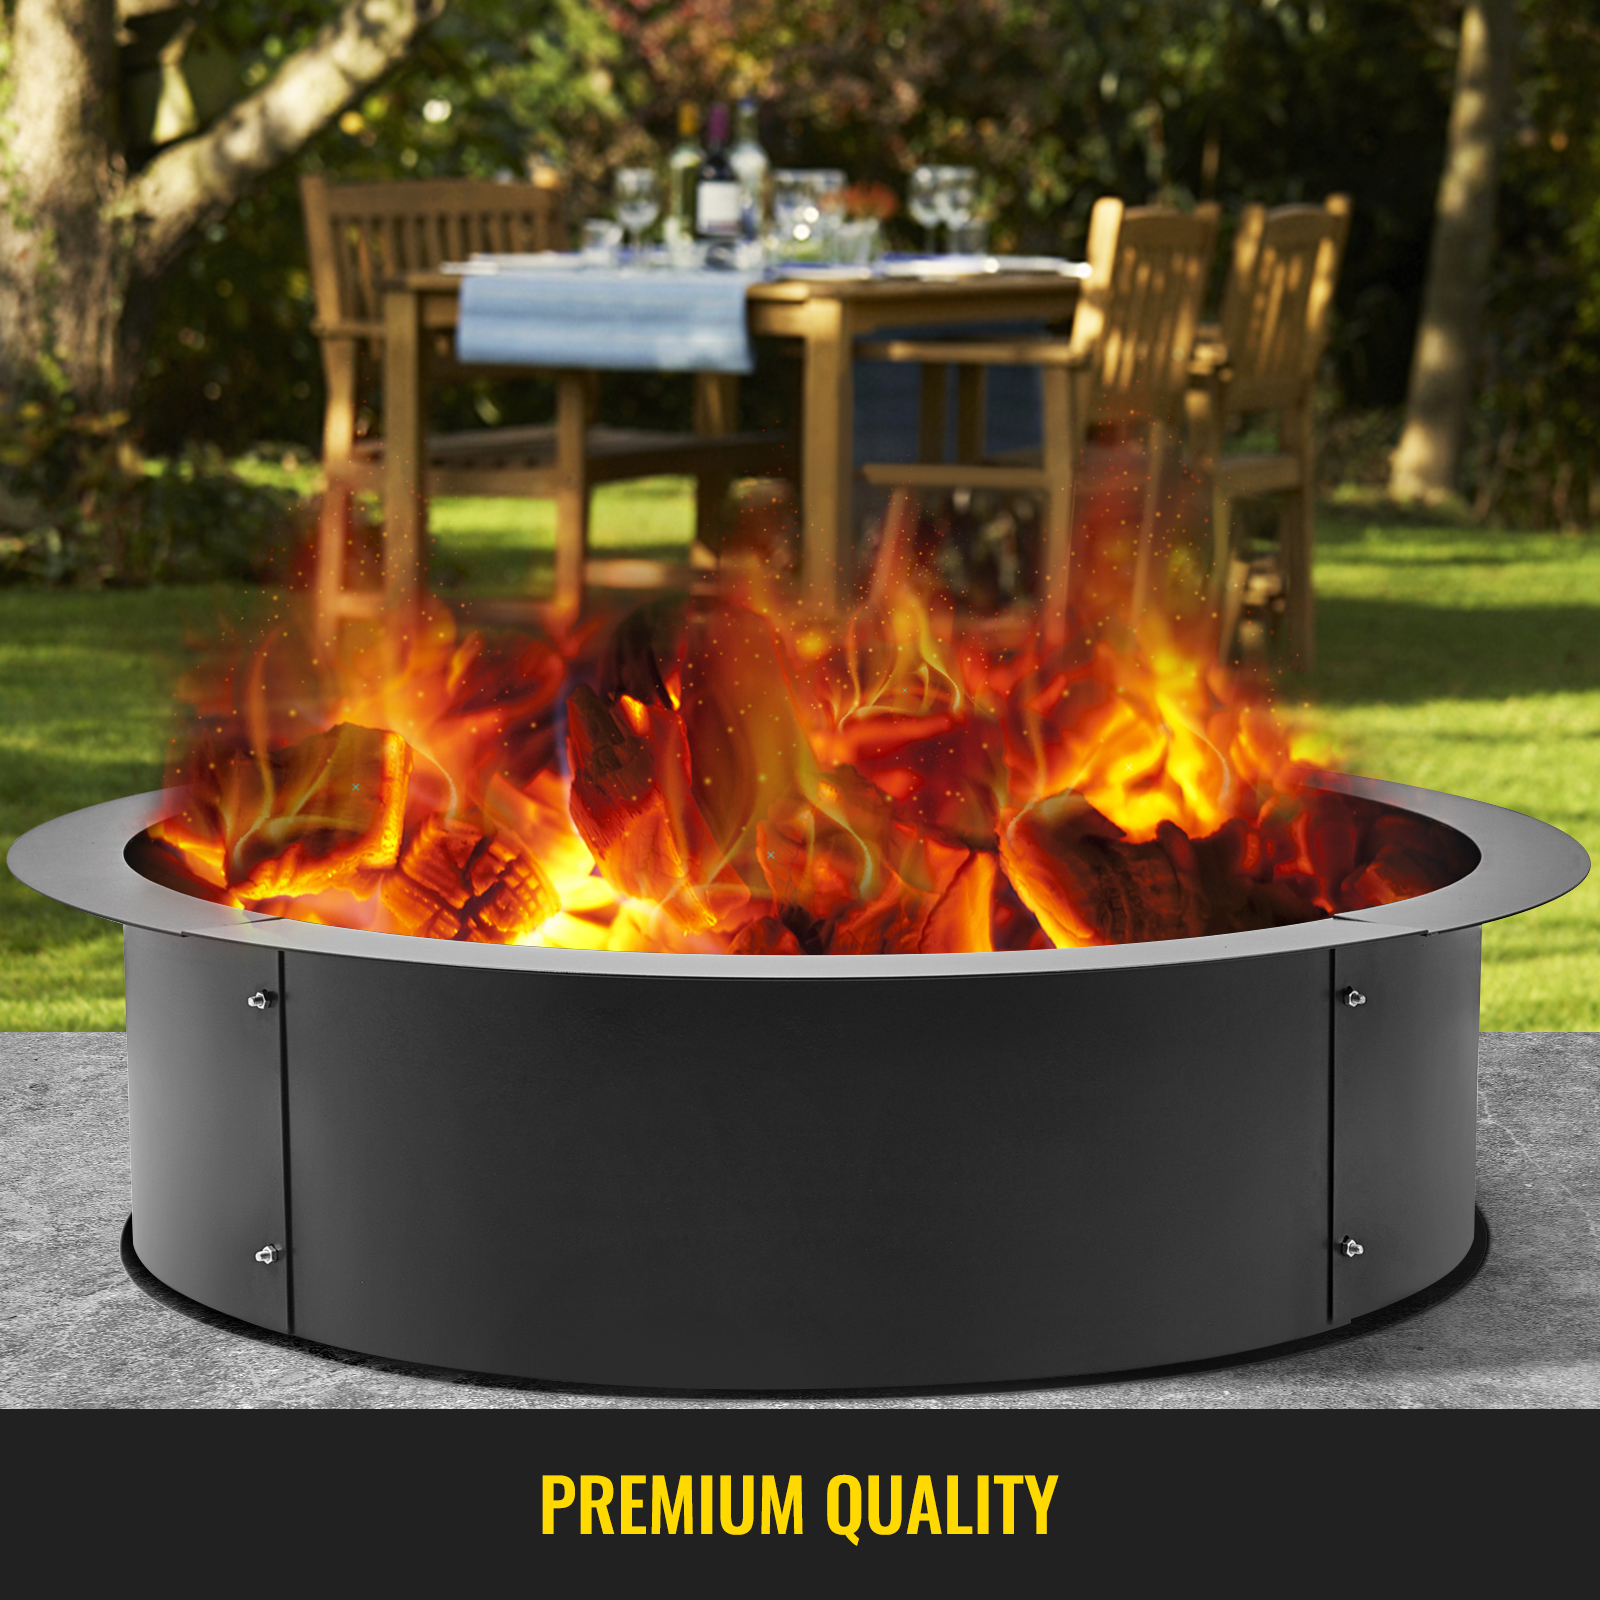 Heavy Duty DIY Above or In Ground Fire Ring Kit 45 Inch Outside x 39 Inch Inside Sunnydaze Wood Burning Outdoor Fire Pit Ring / Liner 